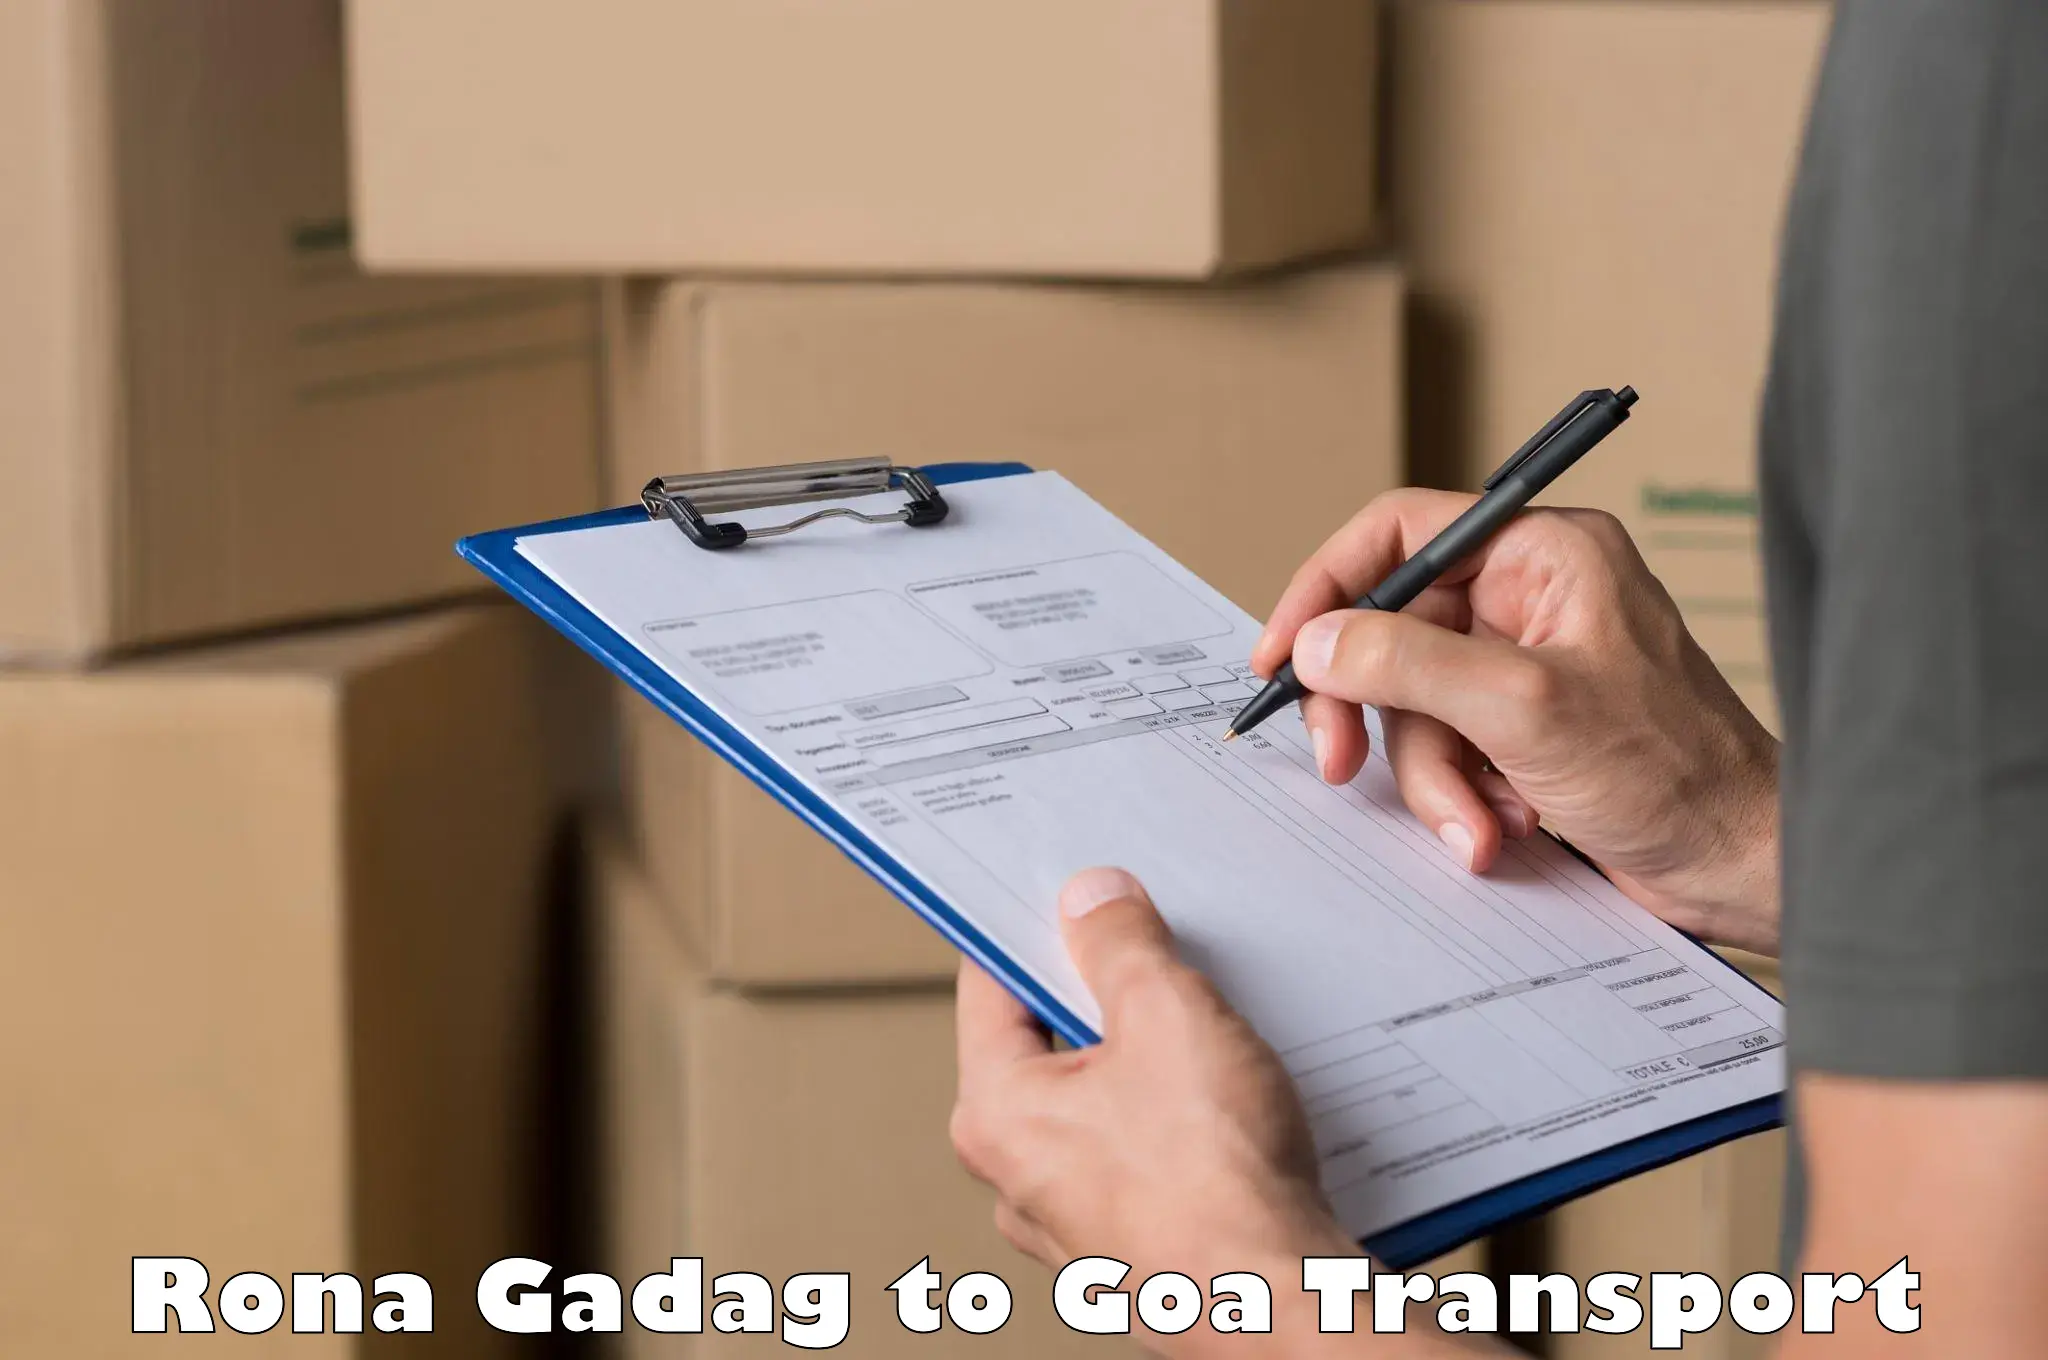 Express transport services in Rona Gadag to IIT Goa